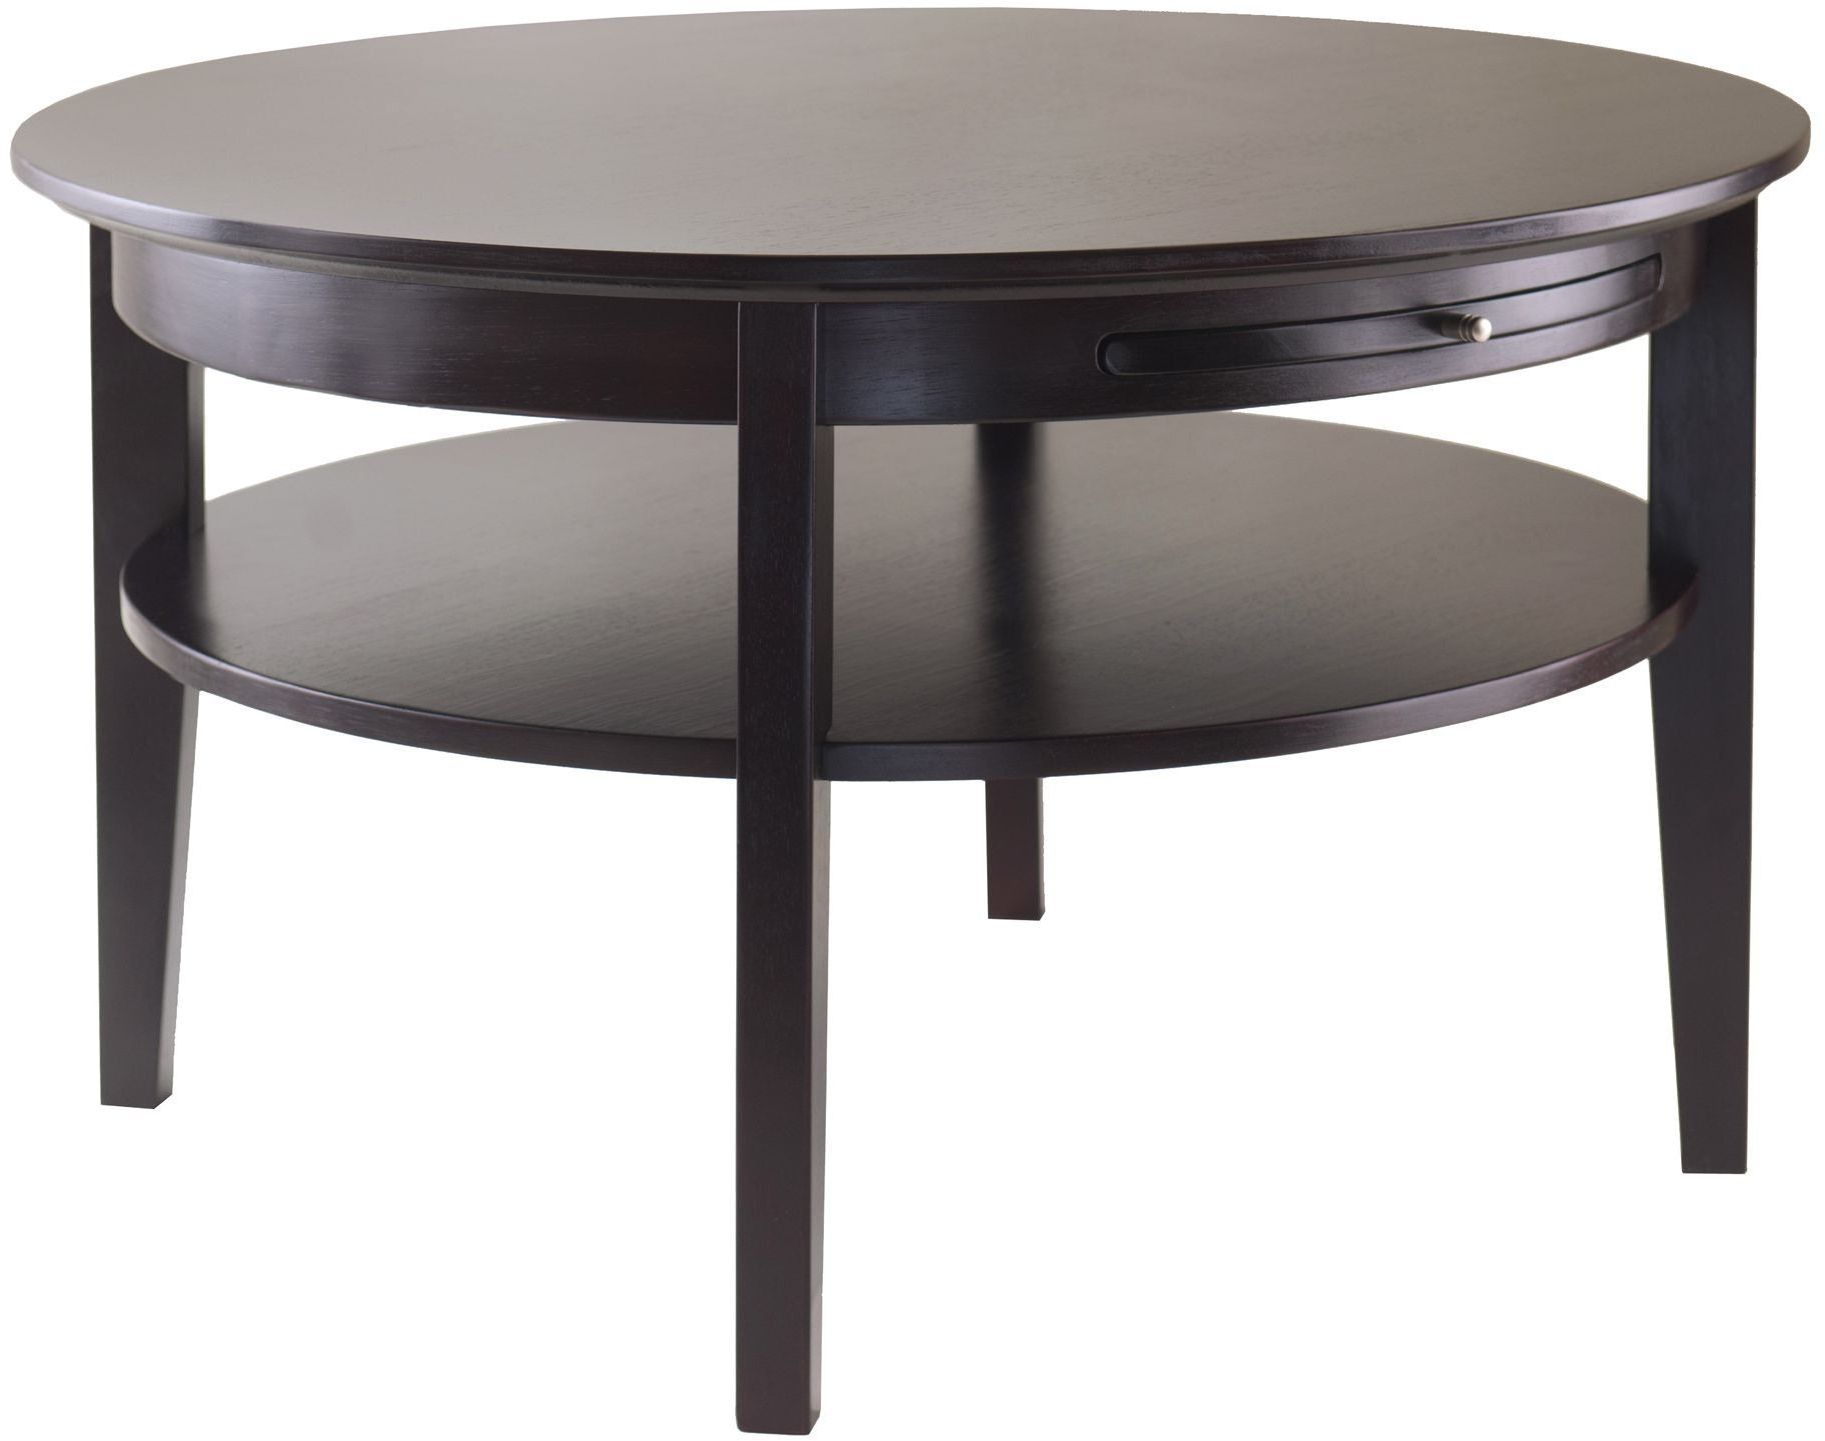 Round Coffee Tables In Recent Amelia Round Coffee Table With Pull Out Tray From (View 5 of 20)